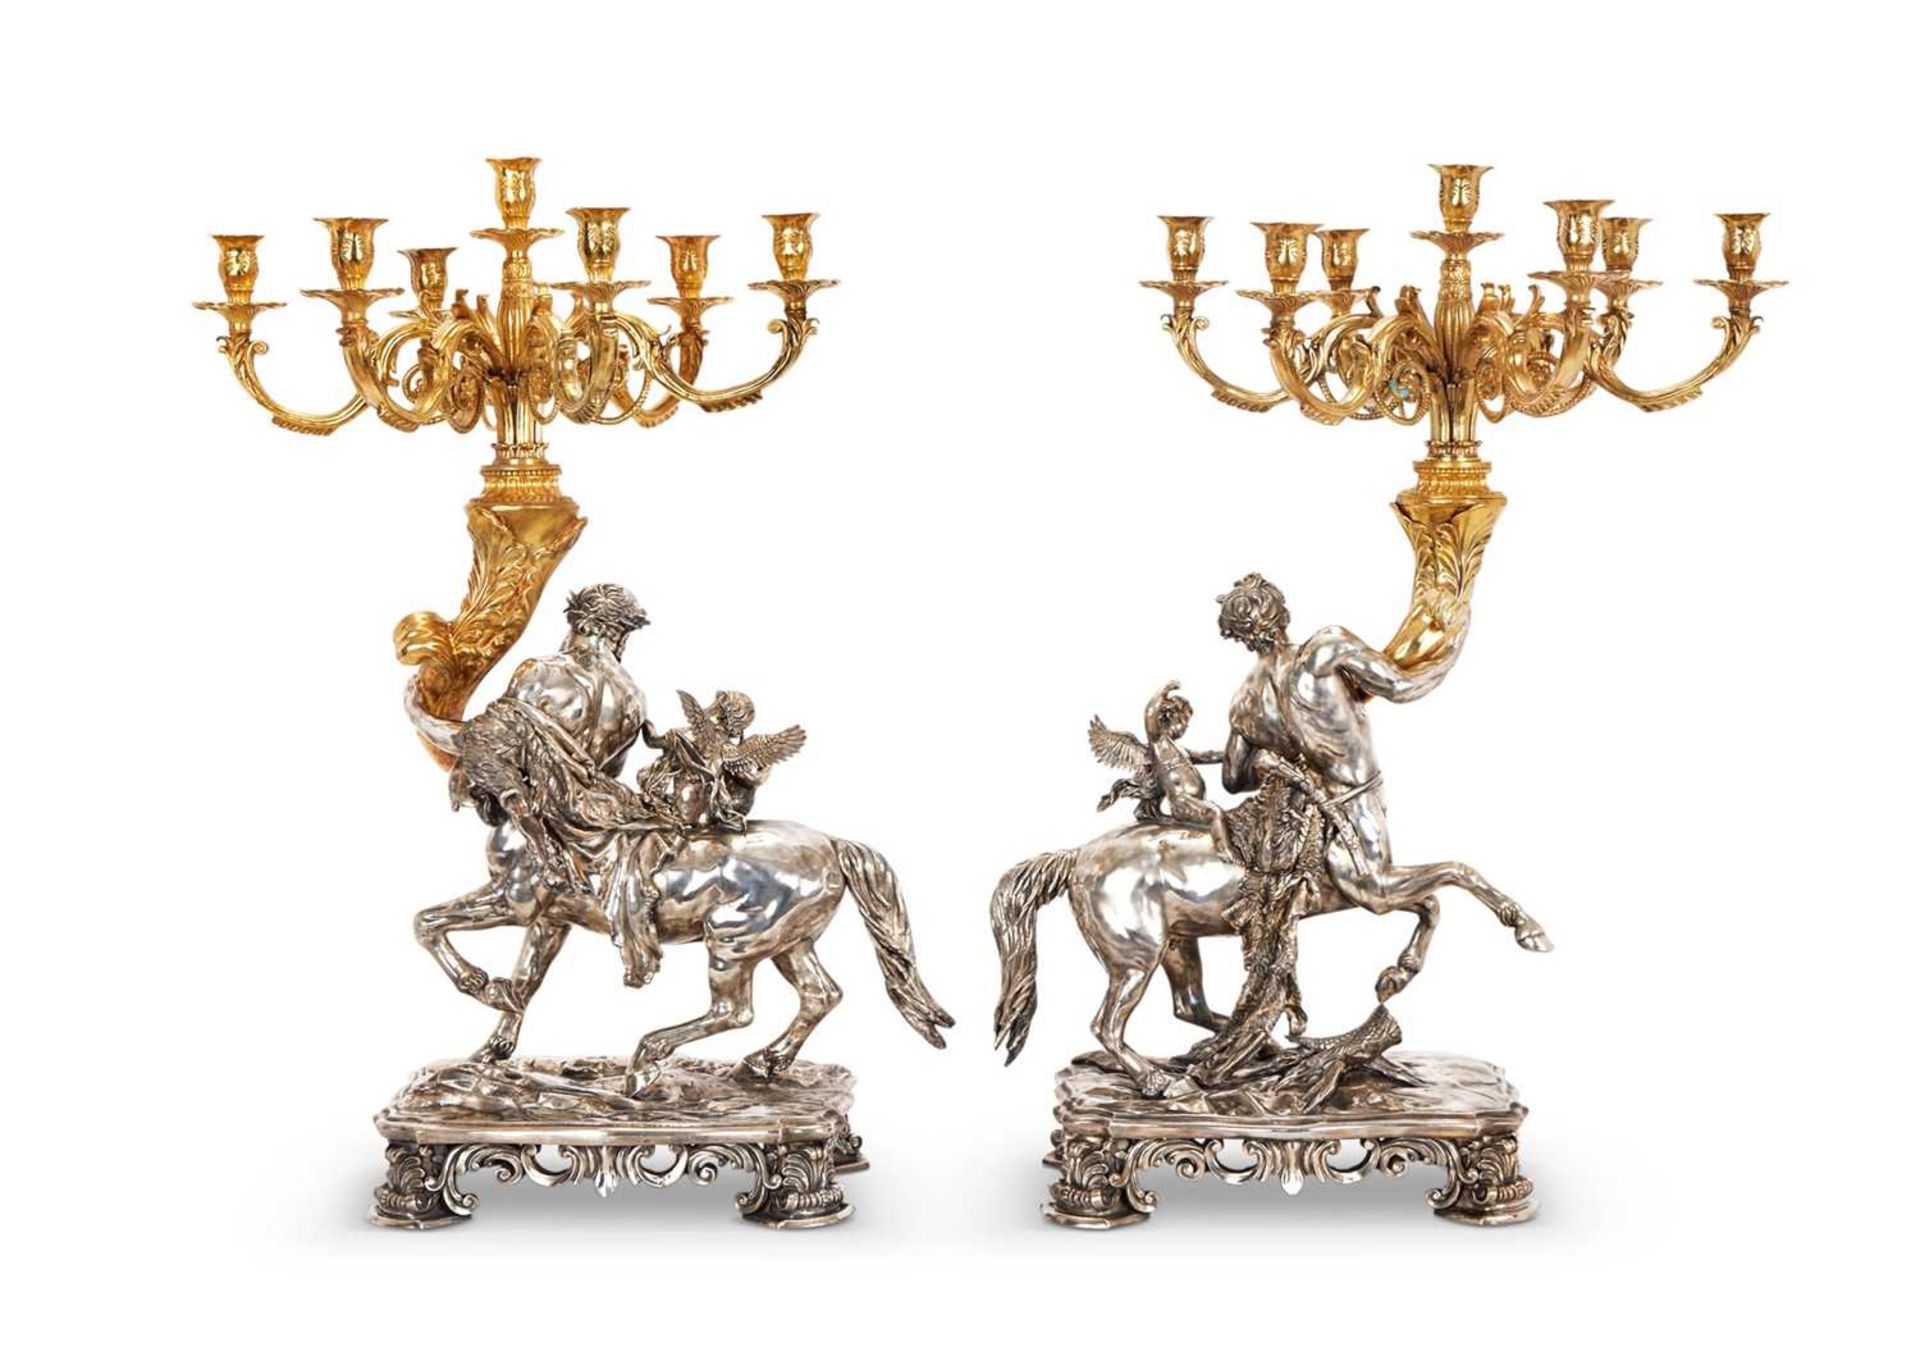 A MASSIVE PAIR OF SILVER AND SILVER GILT ITALIAN BAROQUE STYLE CANDELABRA - Image 2 of 9